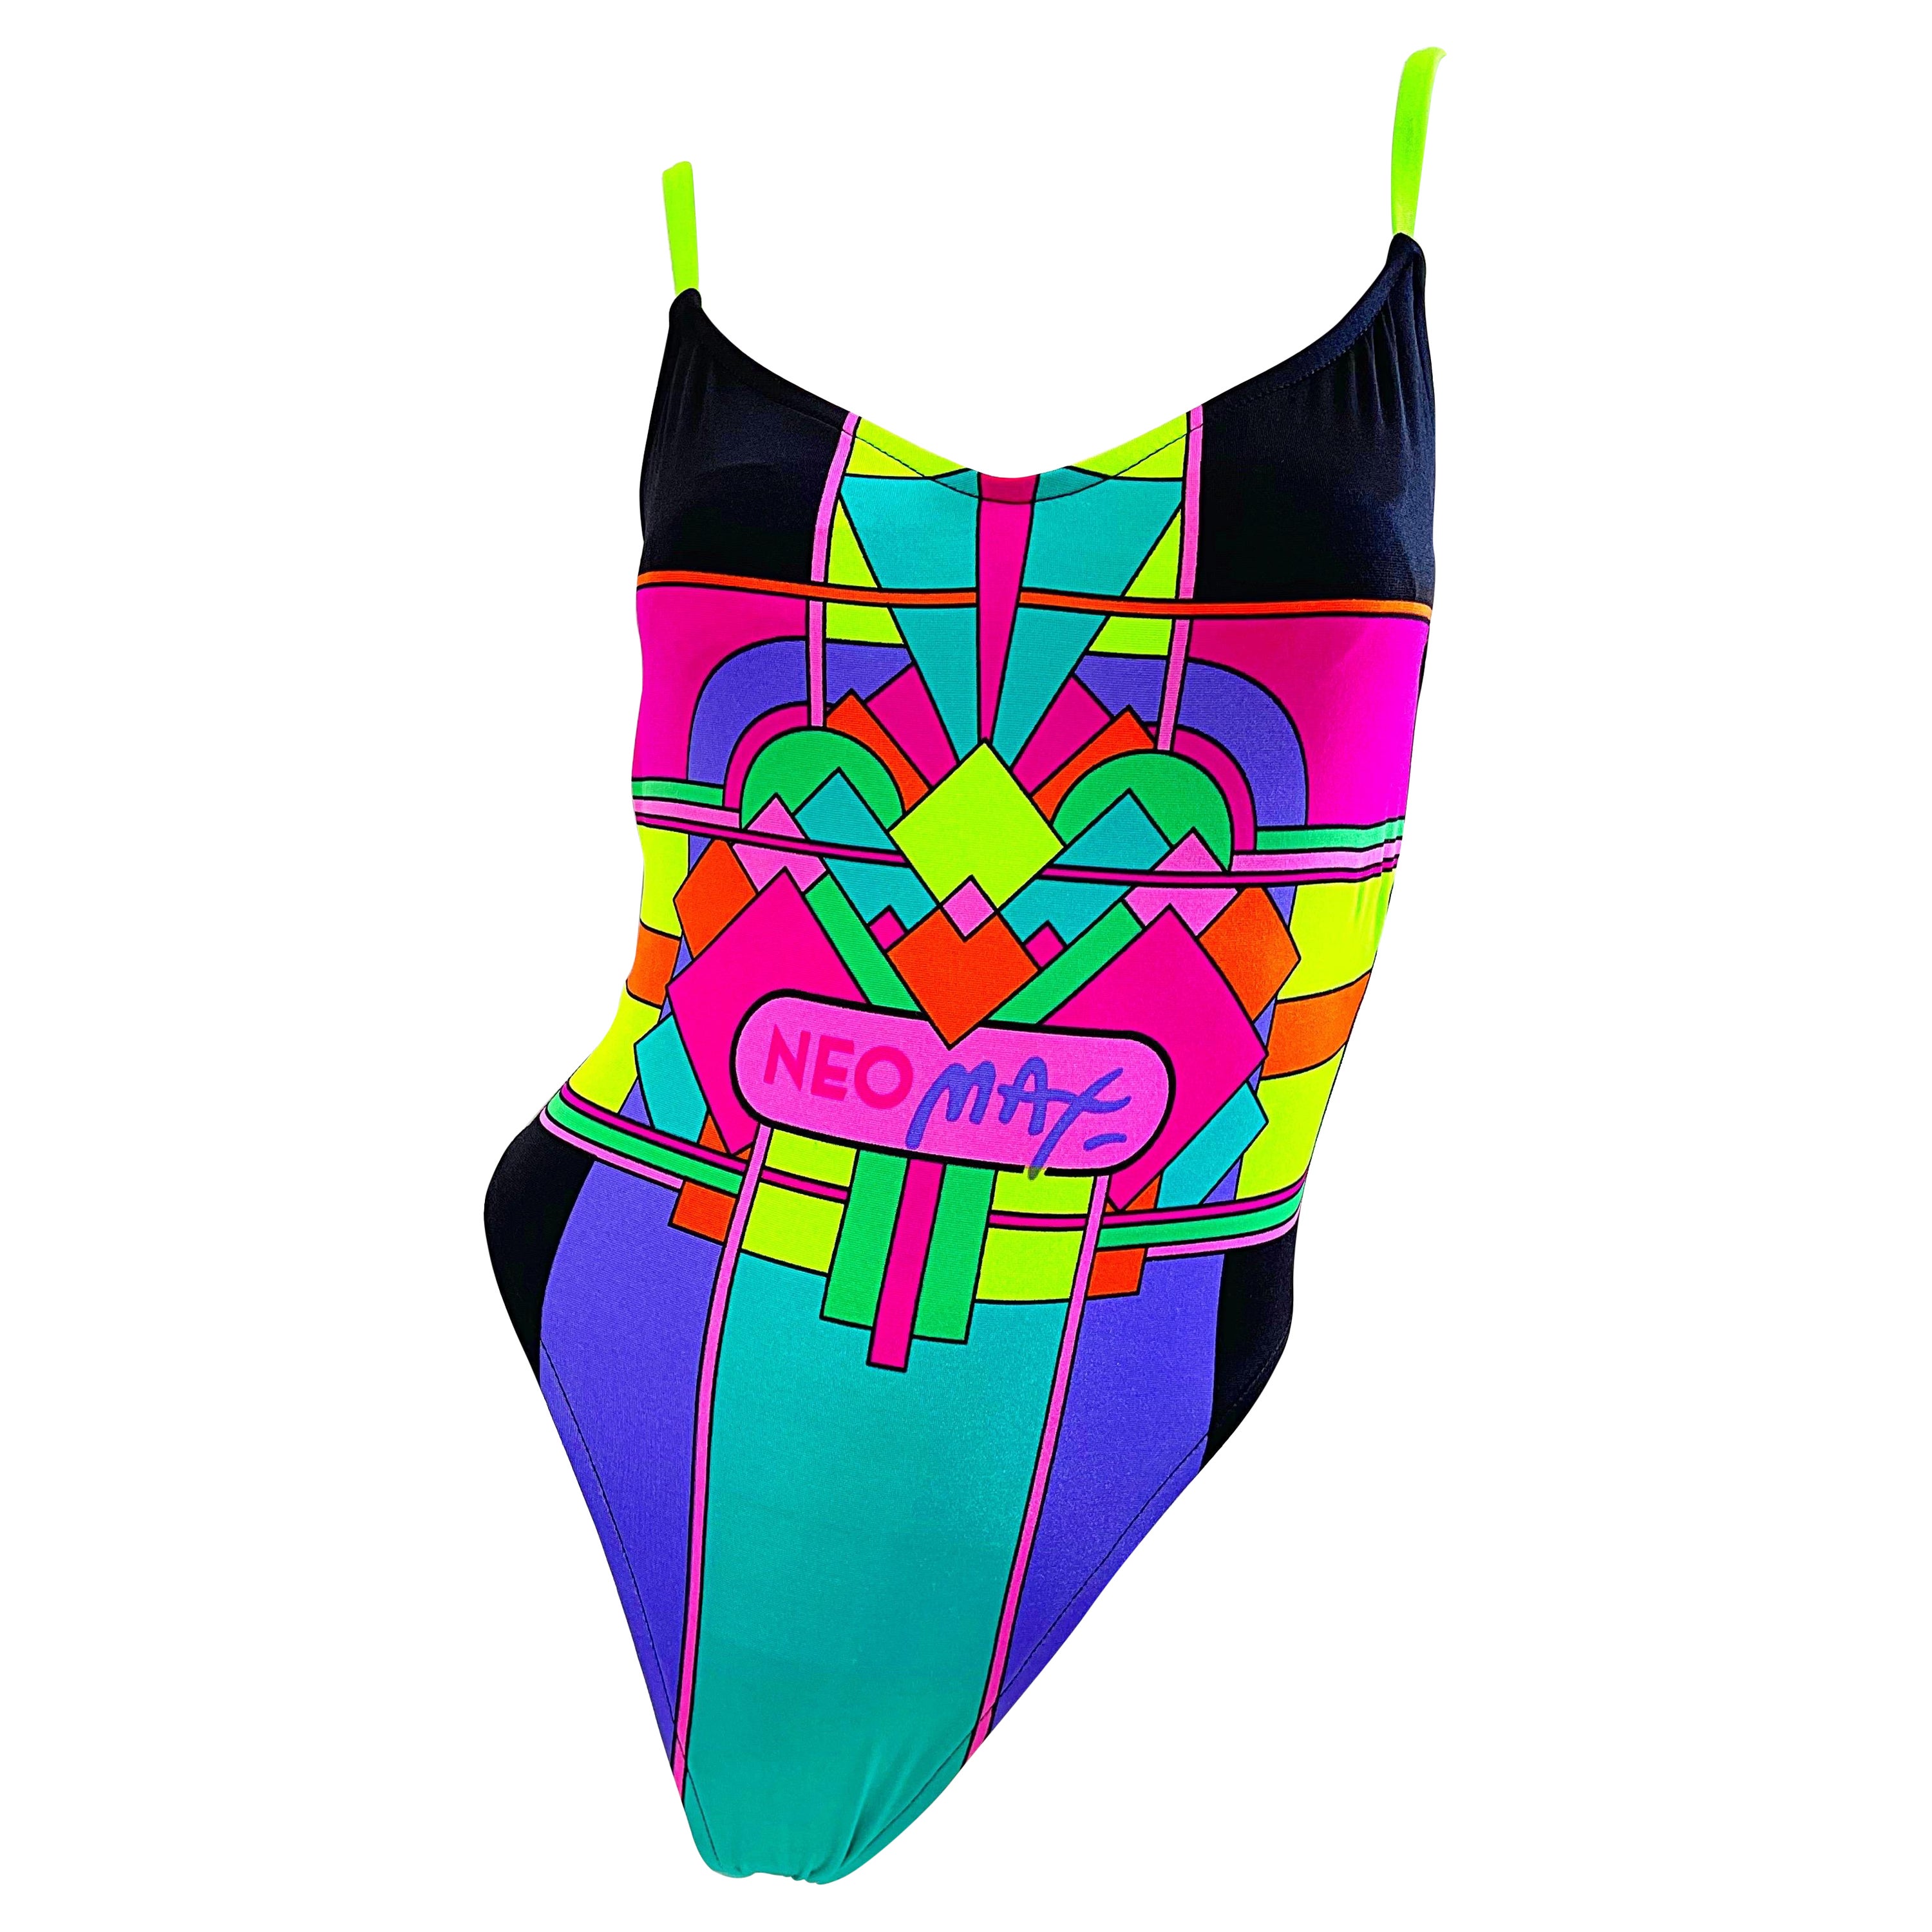 NWT 1980s Peter Max Neomax Neon Abstract Art Print One Piece Swimsuit Bodysuit For Sale